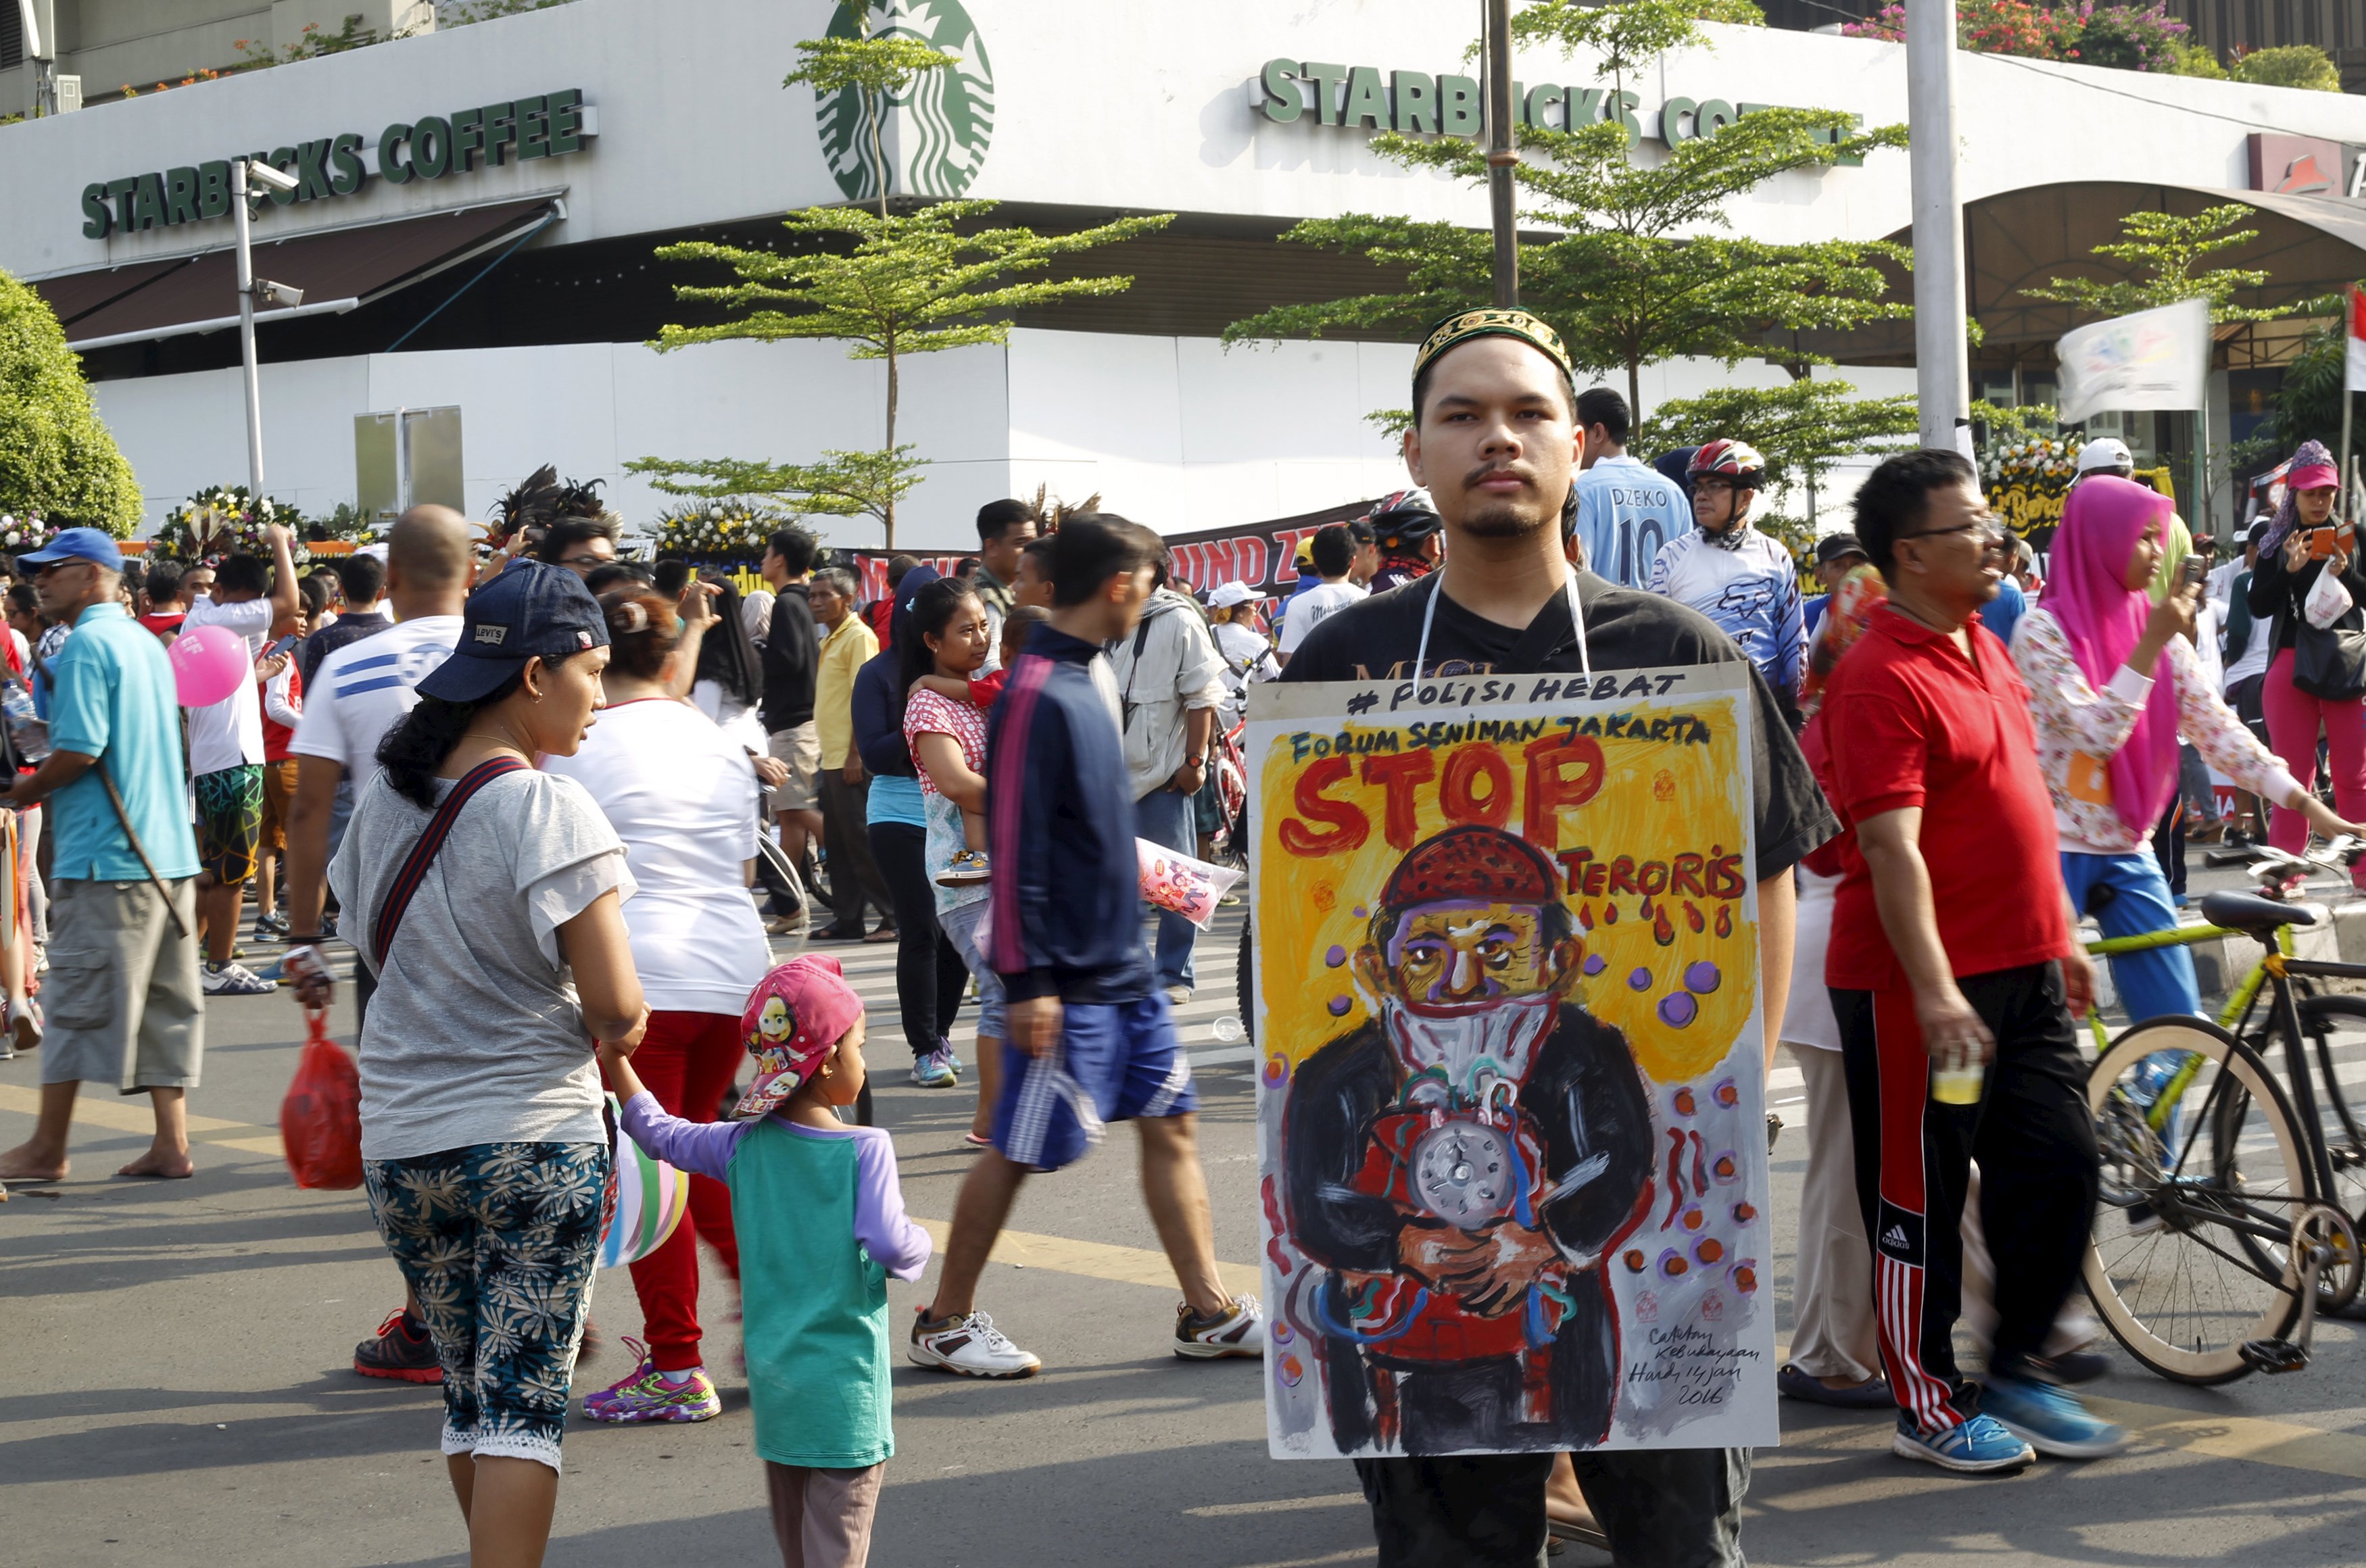 A man holds a placard that reads "Stop terrorists" during the "car free" period at the site of this week's militant attack in central Jakarta, Indonesia, January 17, 2016. Indonesian police on Saturday named the five men they suspect launched this week's gun and bomb attack in Jakarta, which was claimed by Islamic State, and said they had arrested 12 people linked to the plot who planned to strike other cities. REUTERS/Garry Lotulung EDITORIAL USE ONLY. NO RESALES. NO ARCHIVE